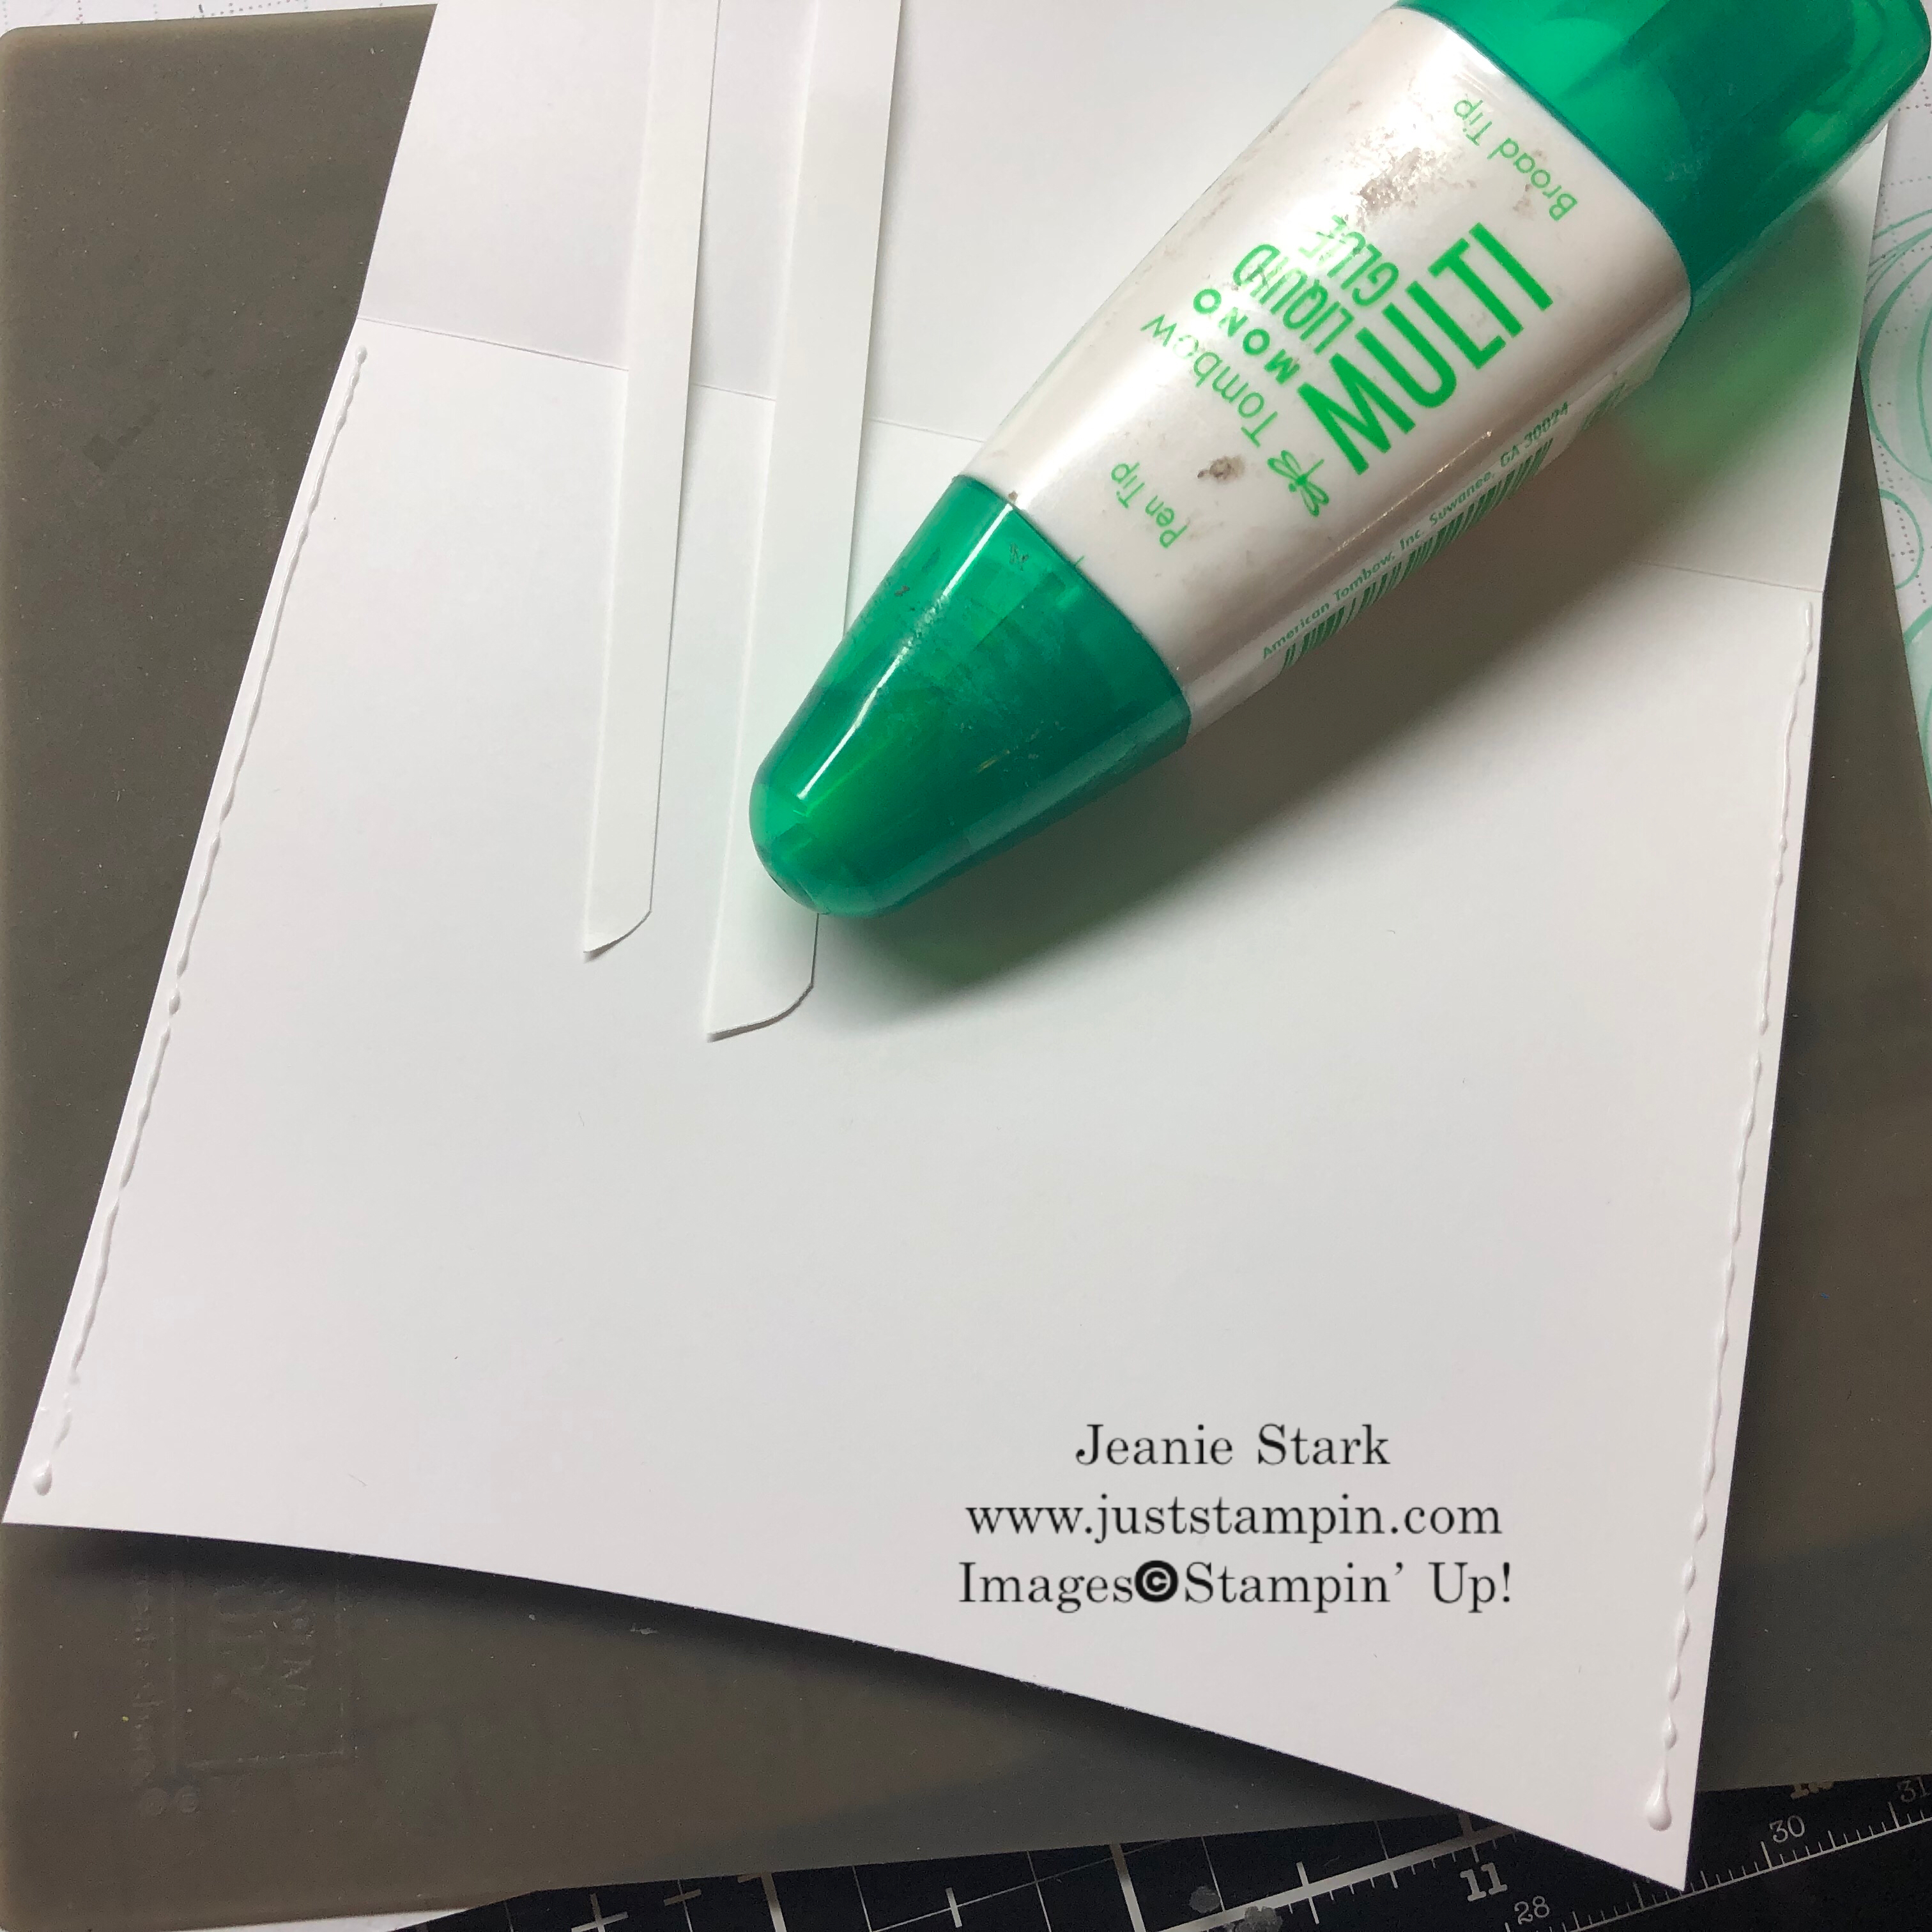 Learn how to make custom envelopes- visit juststampin.com for inspiration, tutorials, and to order Stampin' Up! products - Jeanie Stark StampinUp